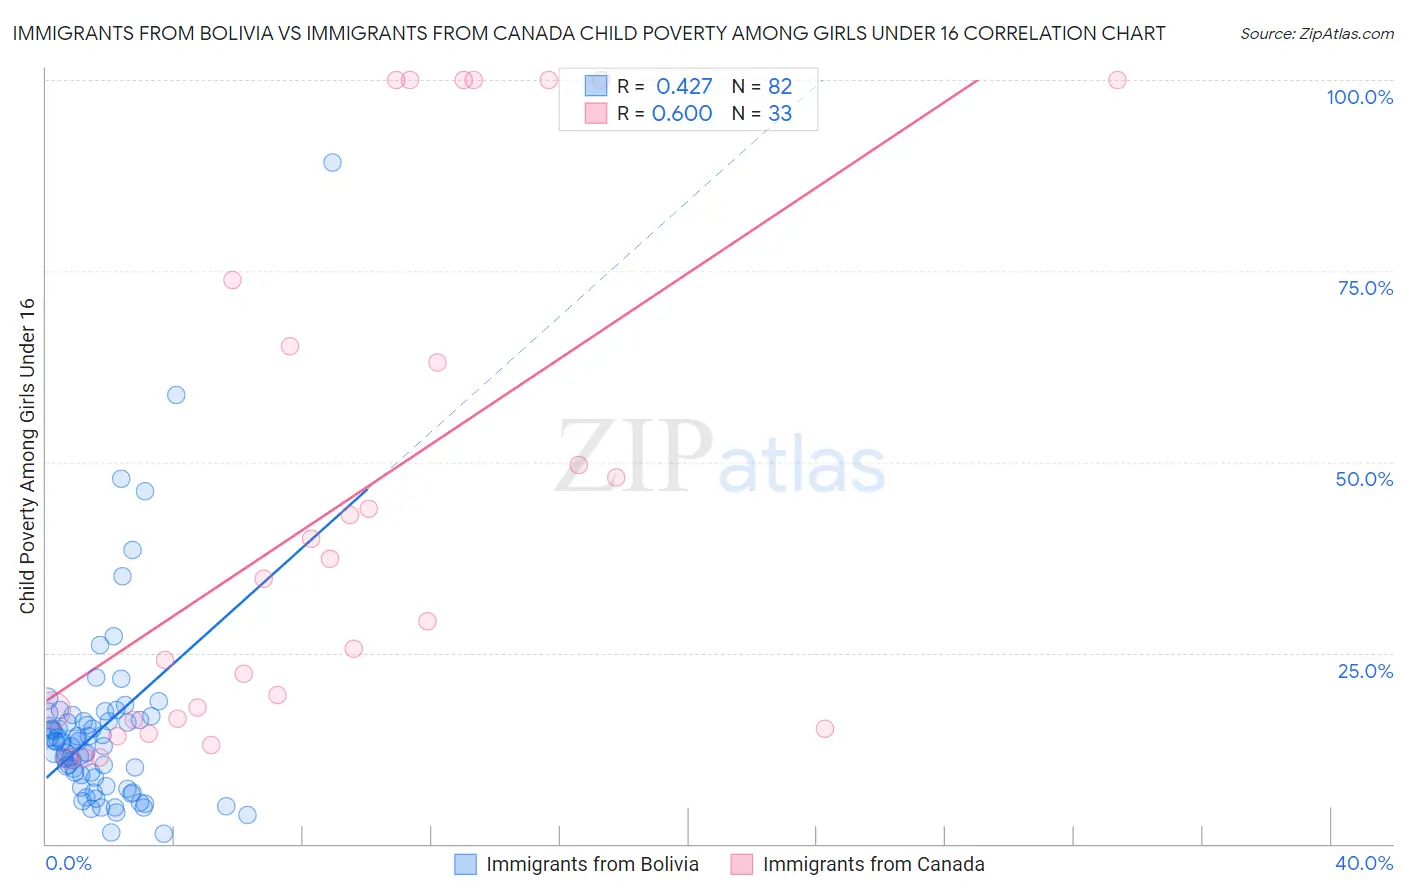 Immigrants from Bolivia vs Immigrants from Canada Child Poverty Among Girls Under 16